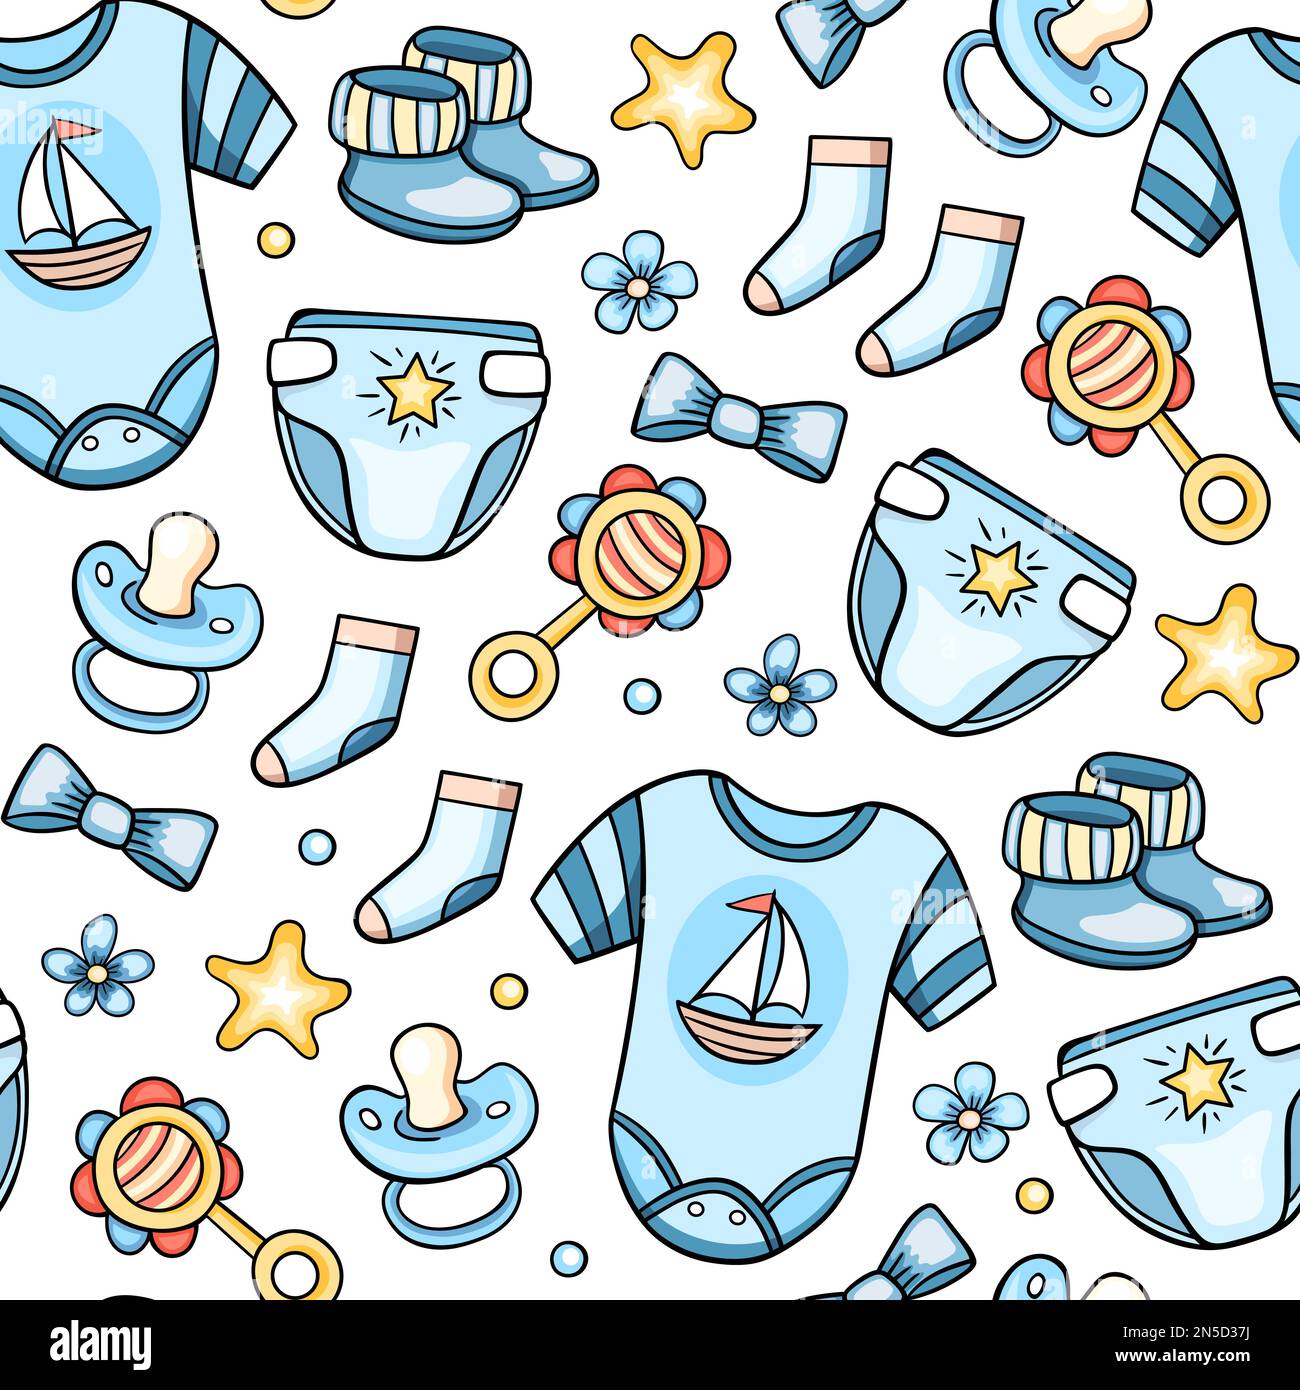 Seamless pattern with blue clothes and accessories for baby boy. Hand drawn background. Stock Photo